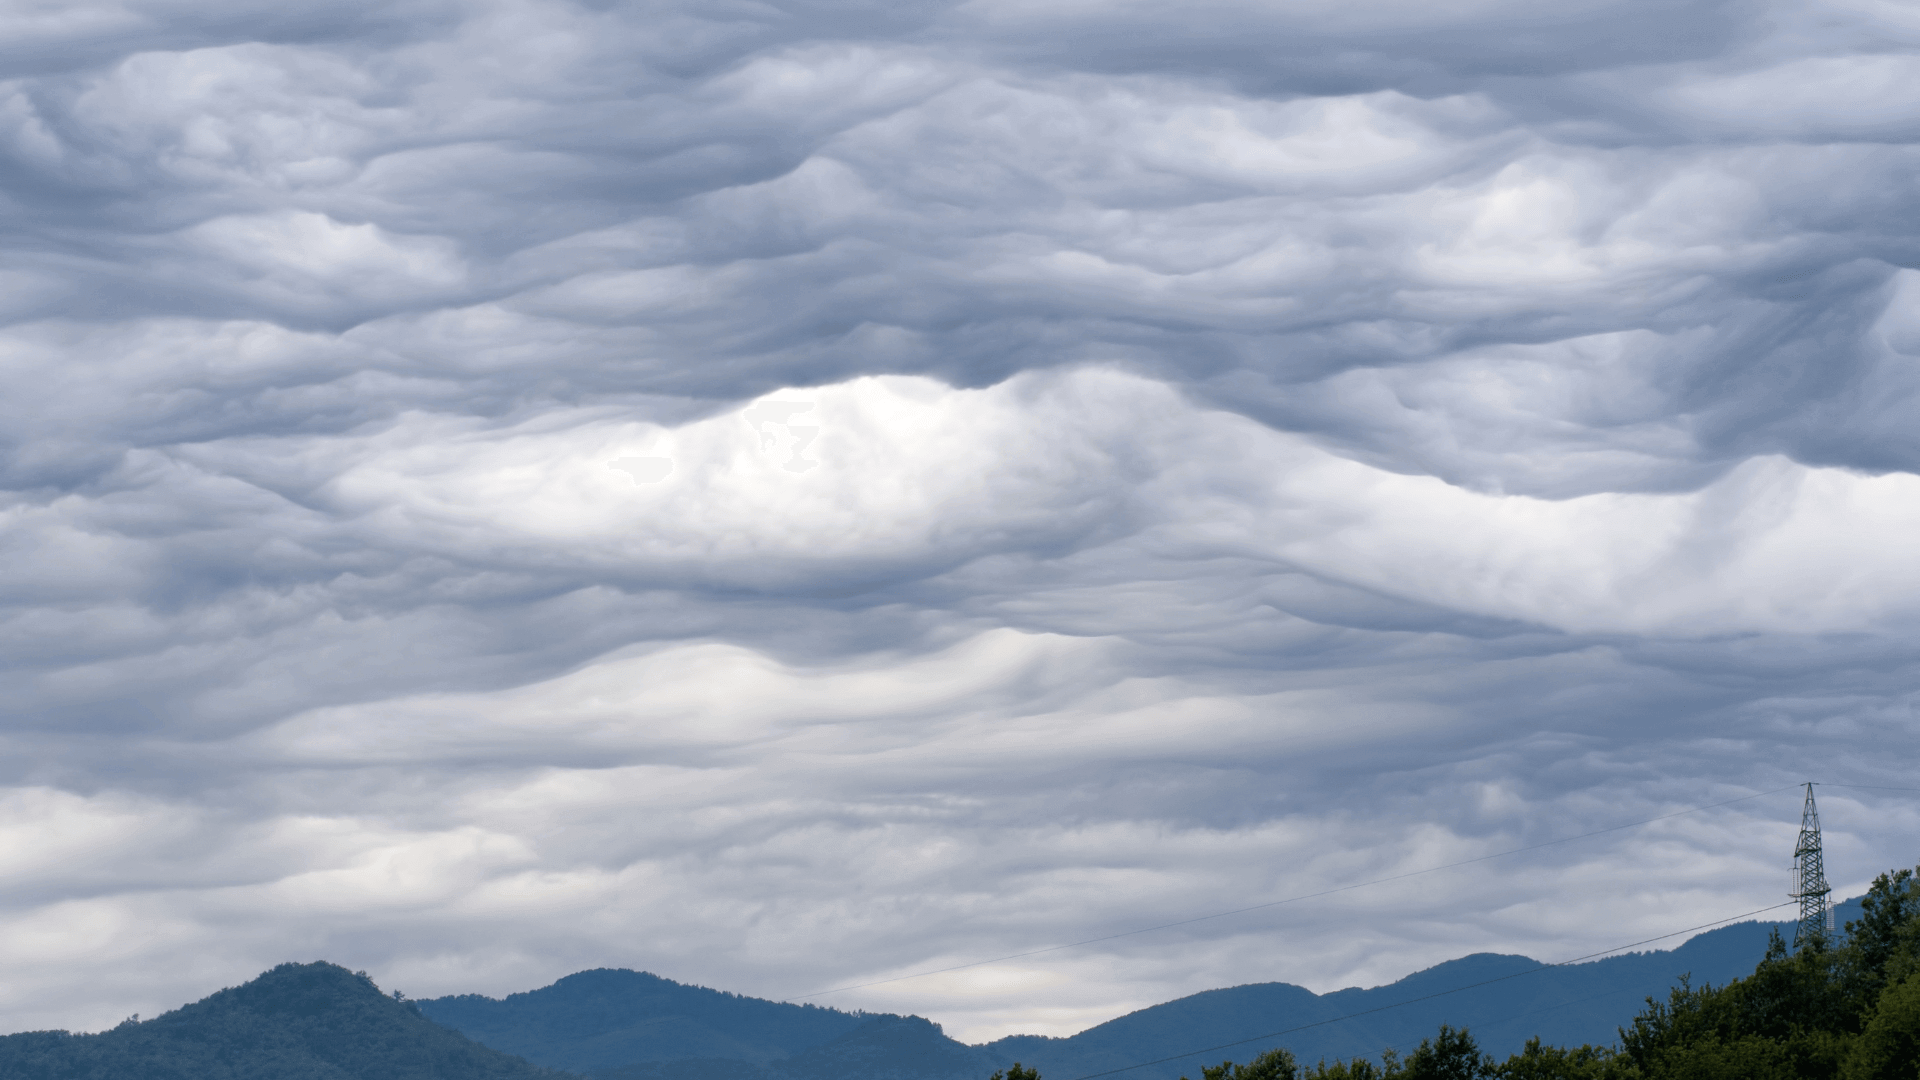 Asperitas clouds form rippling waves in the sky